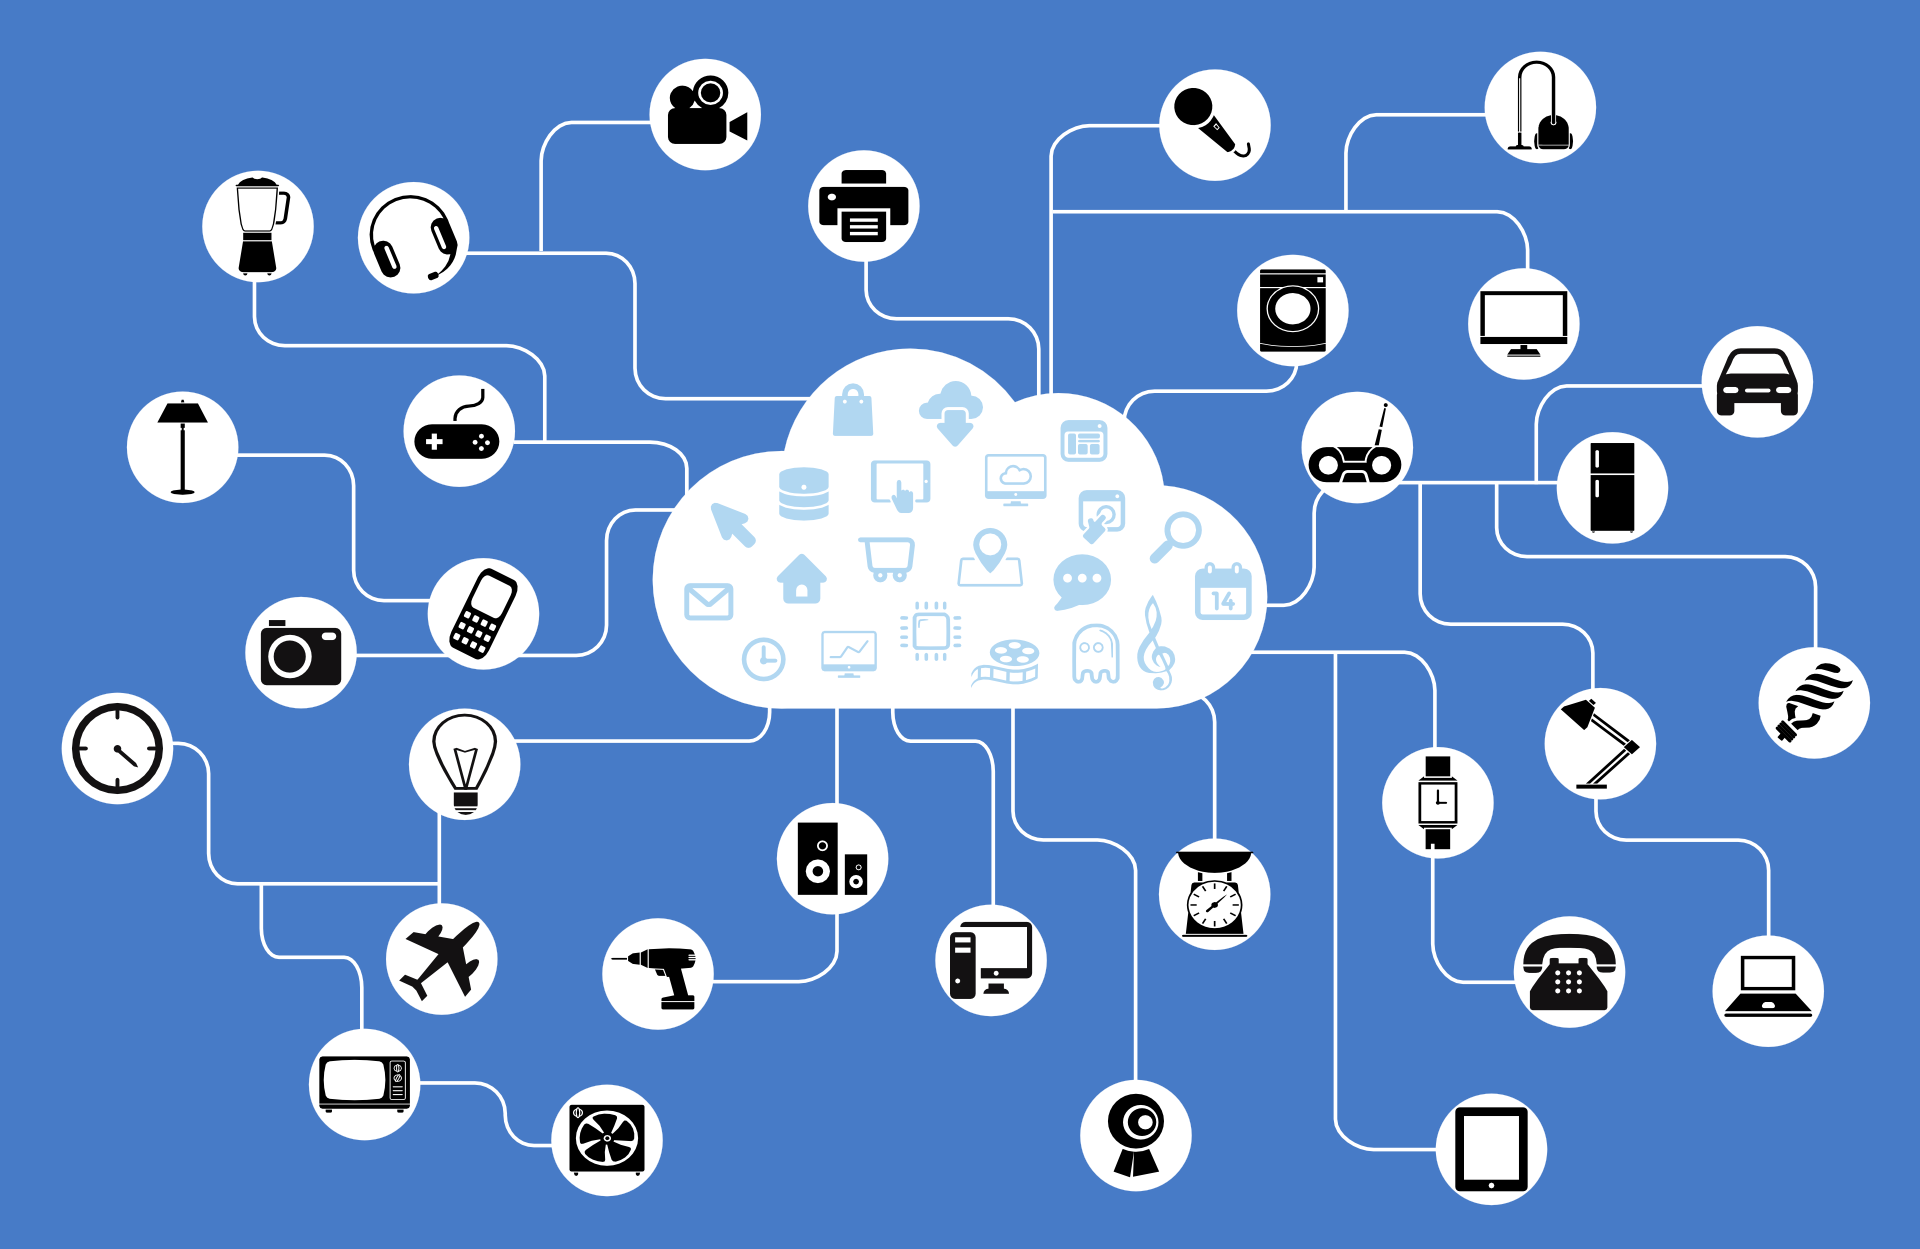 Guest Post: Top 6 Internet Of Things (IoT) Technologies